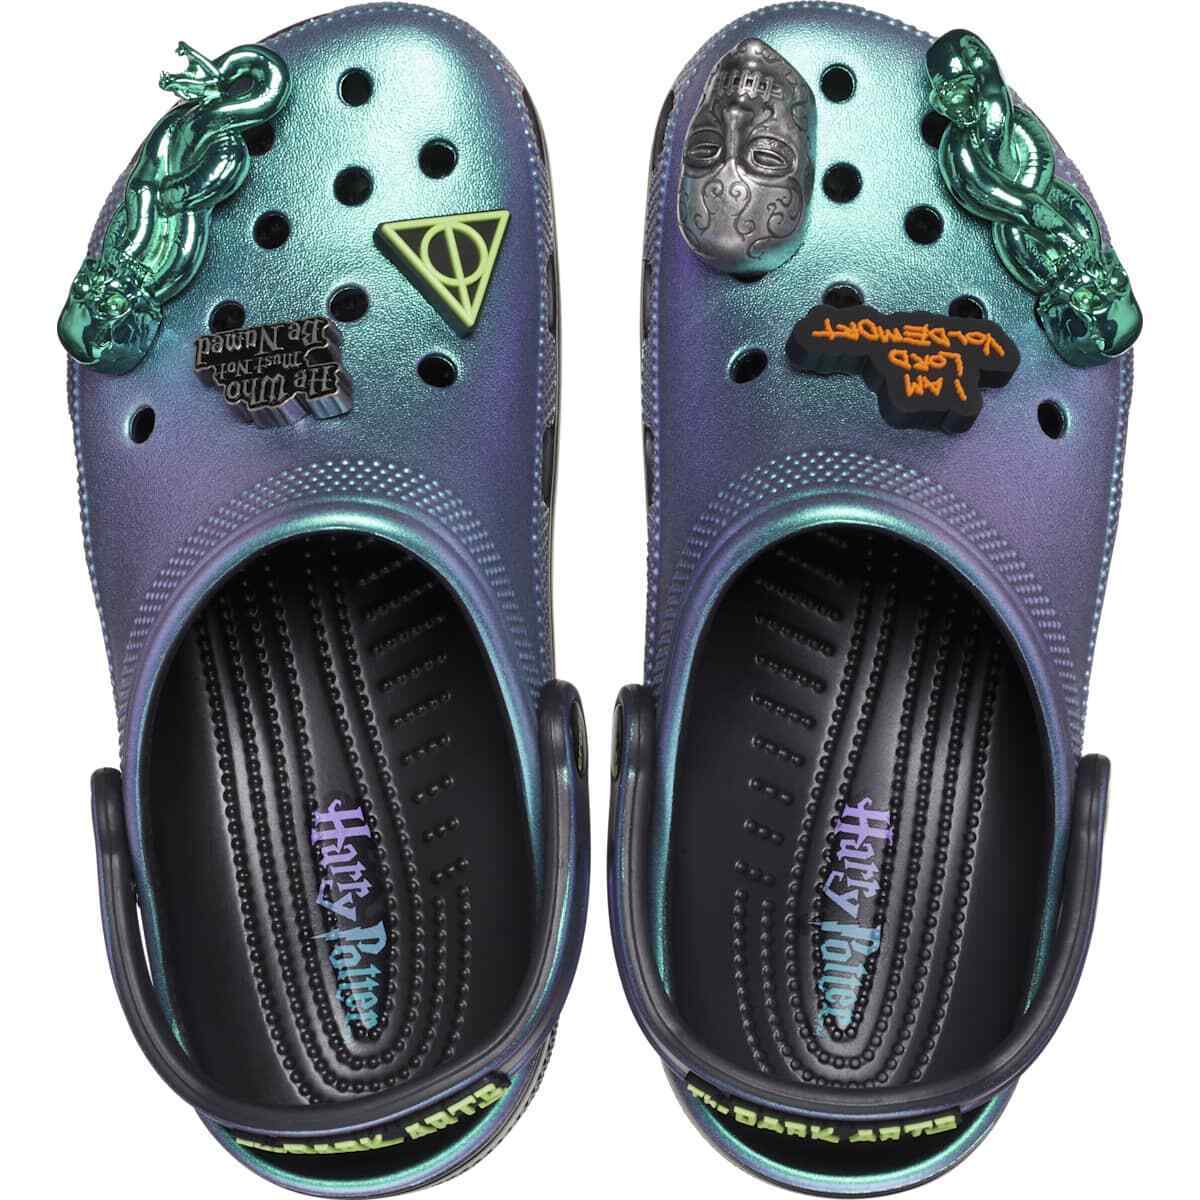 Harry Potter Crocs - Men's and Women's Classic Clogs with Jibbitz Charms